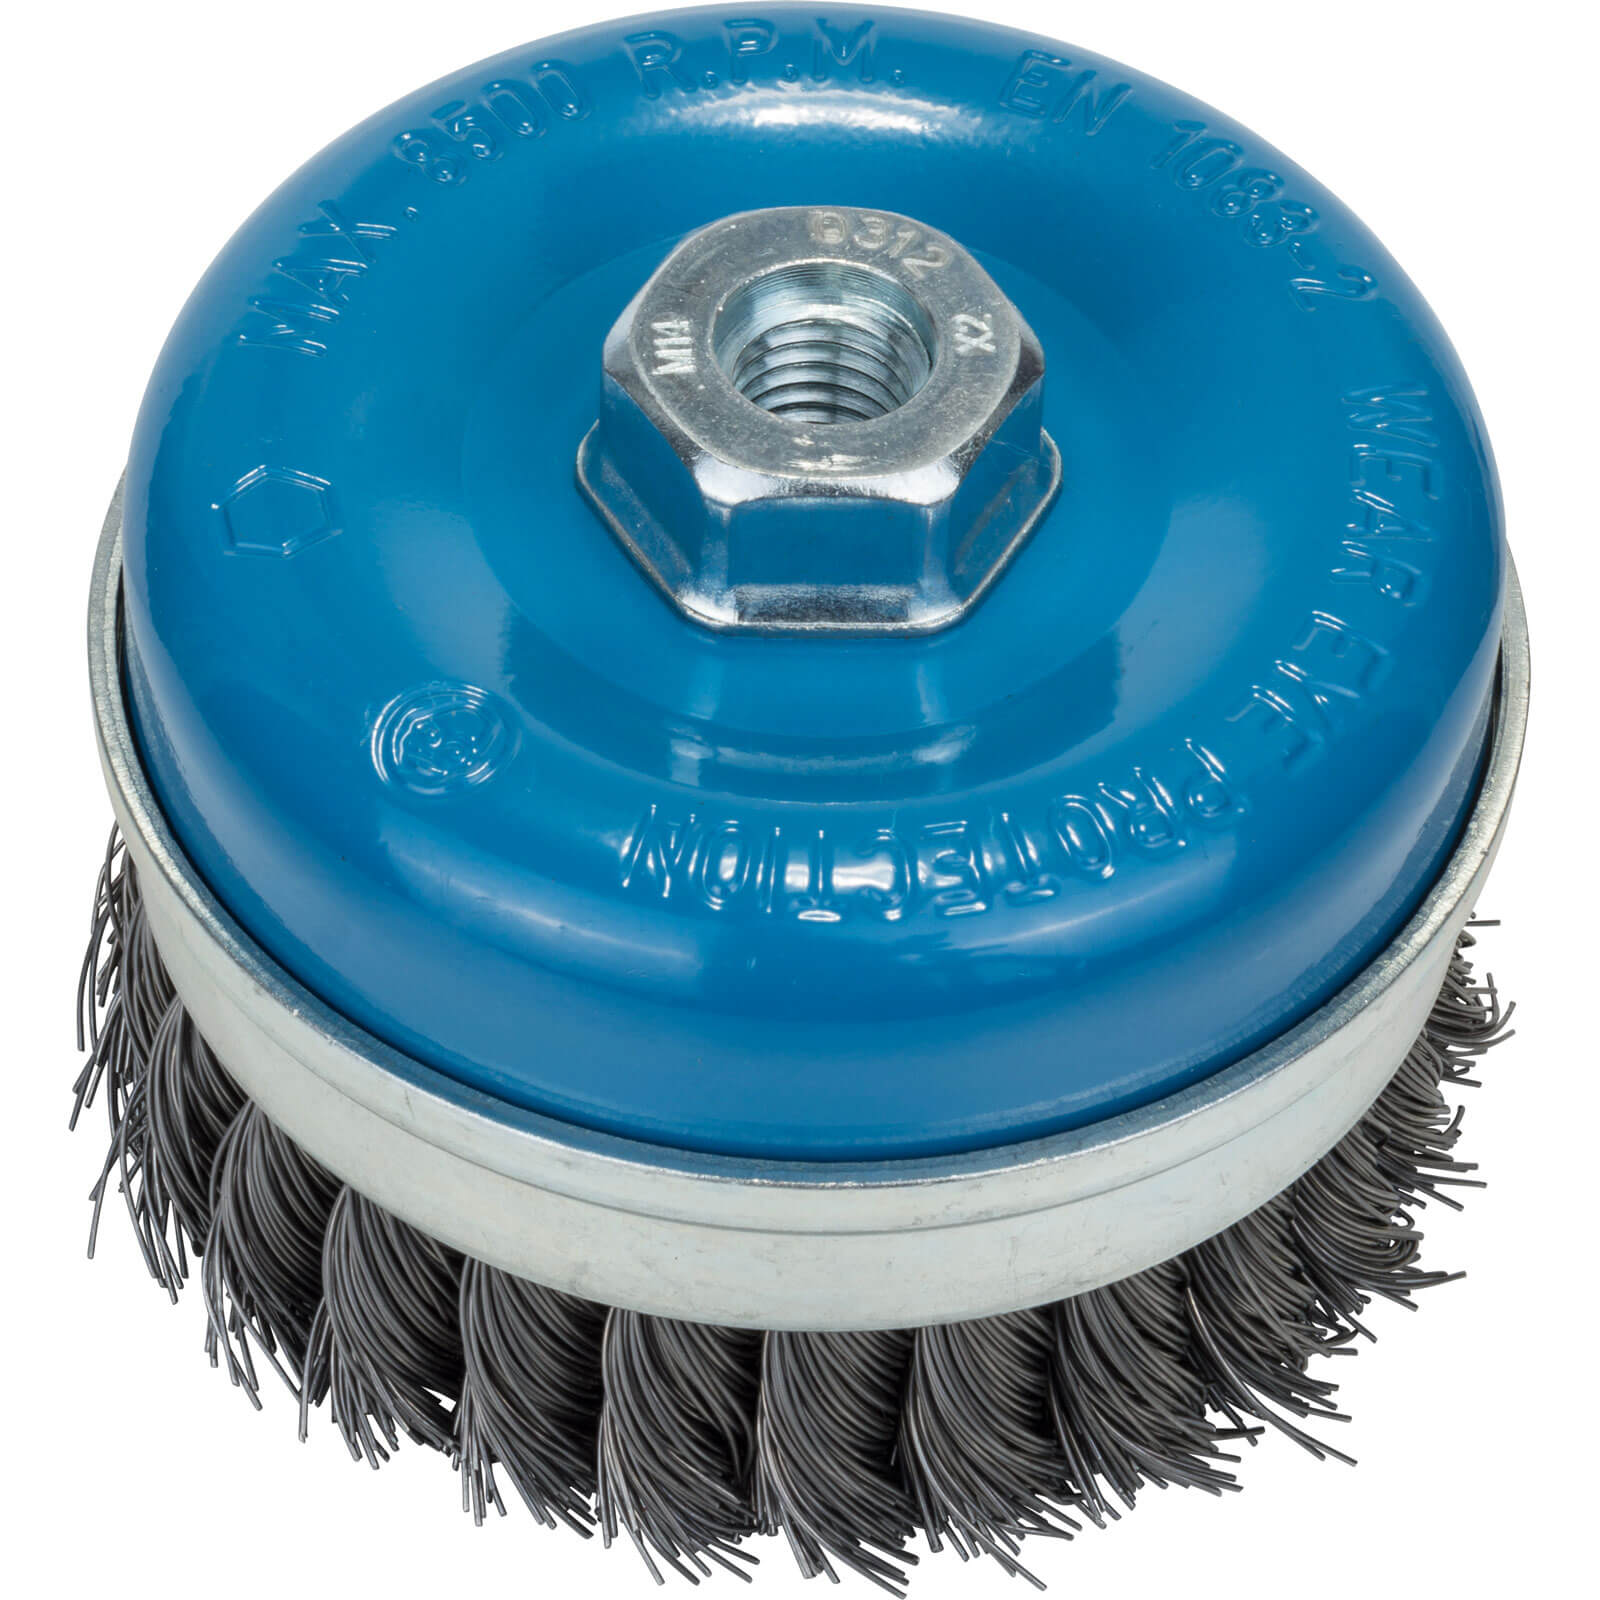 Image of Bosch 0.5mm Knotted Steel Wire Cup Brush 100mm M14 Thread